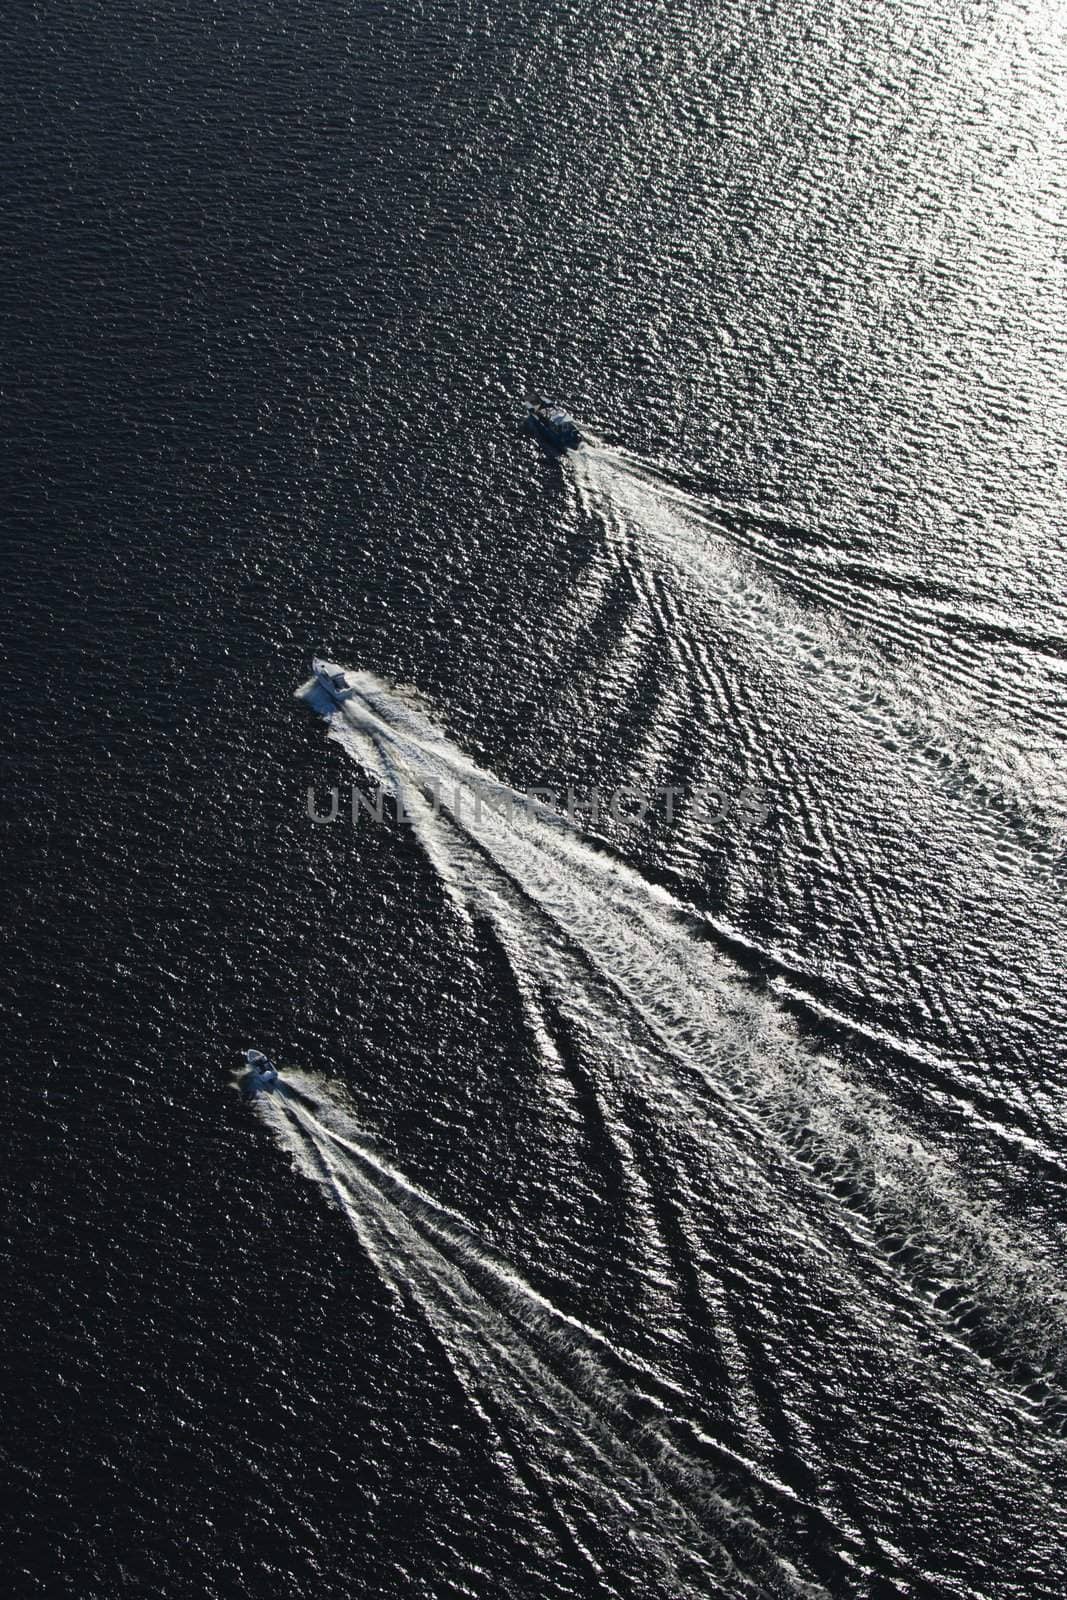 Aerial view of three boats traveling together in Sydney, Australia.